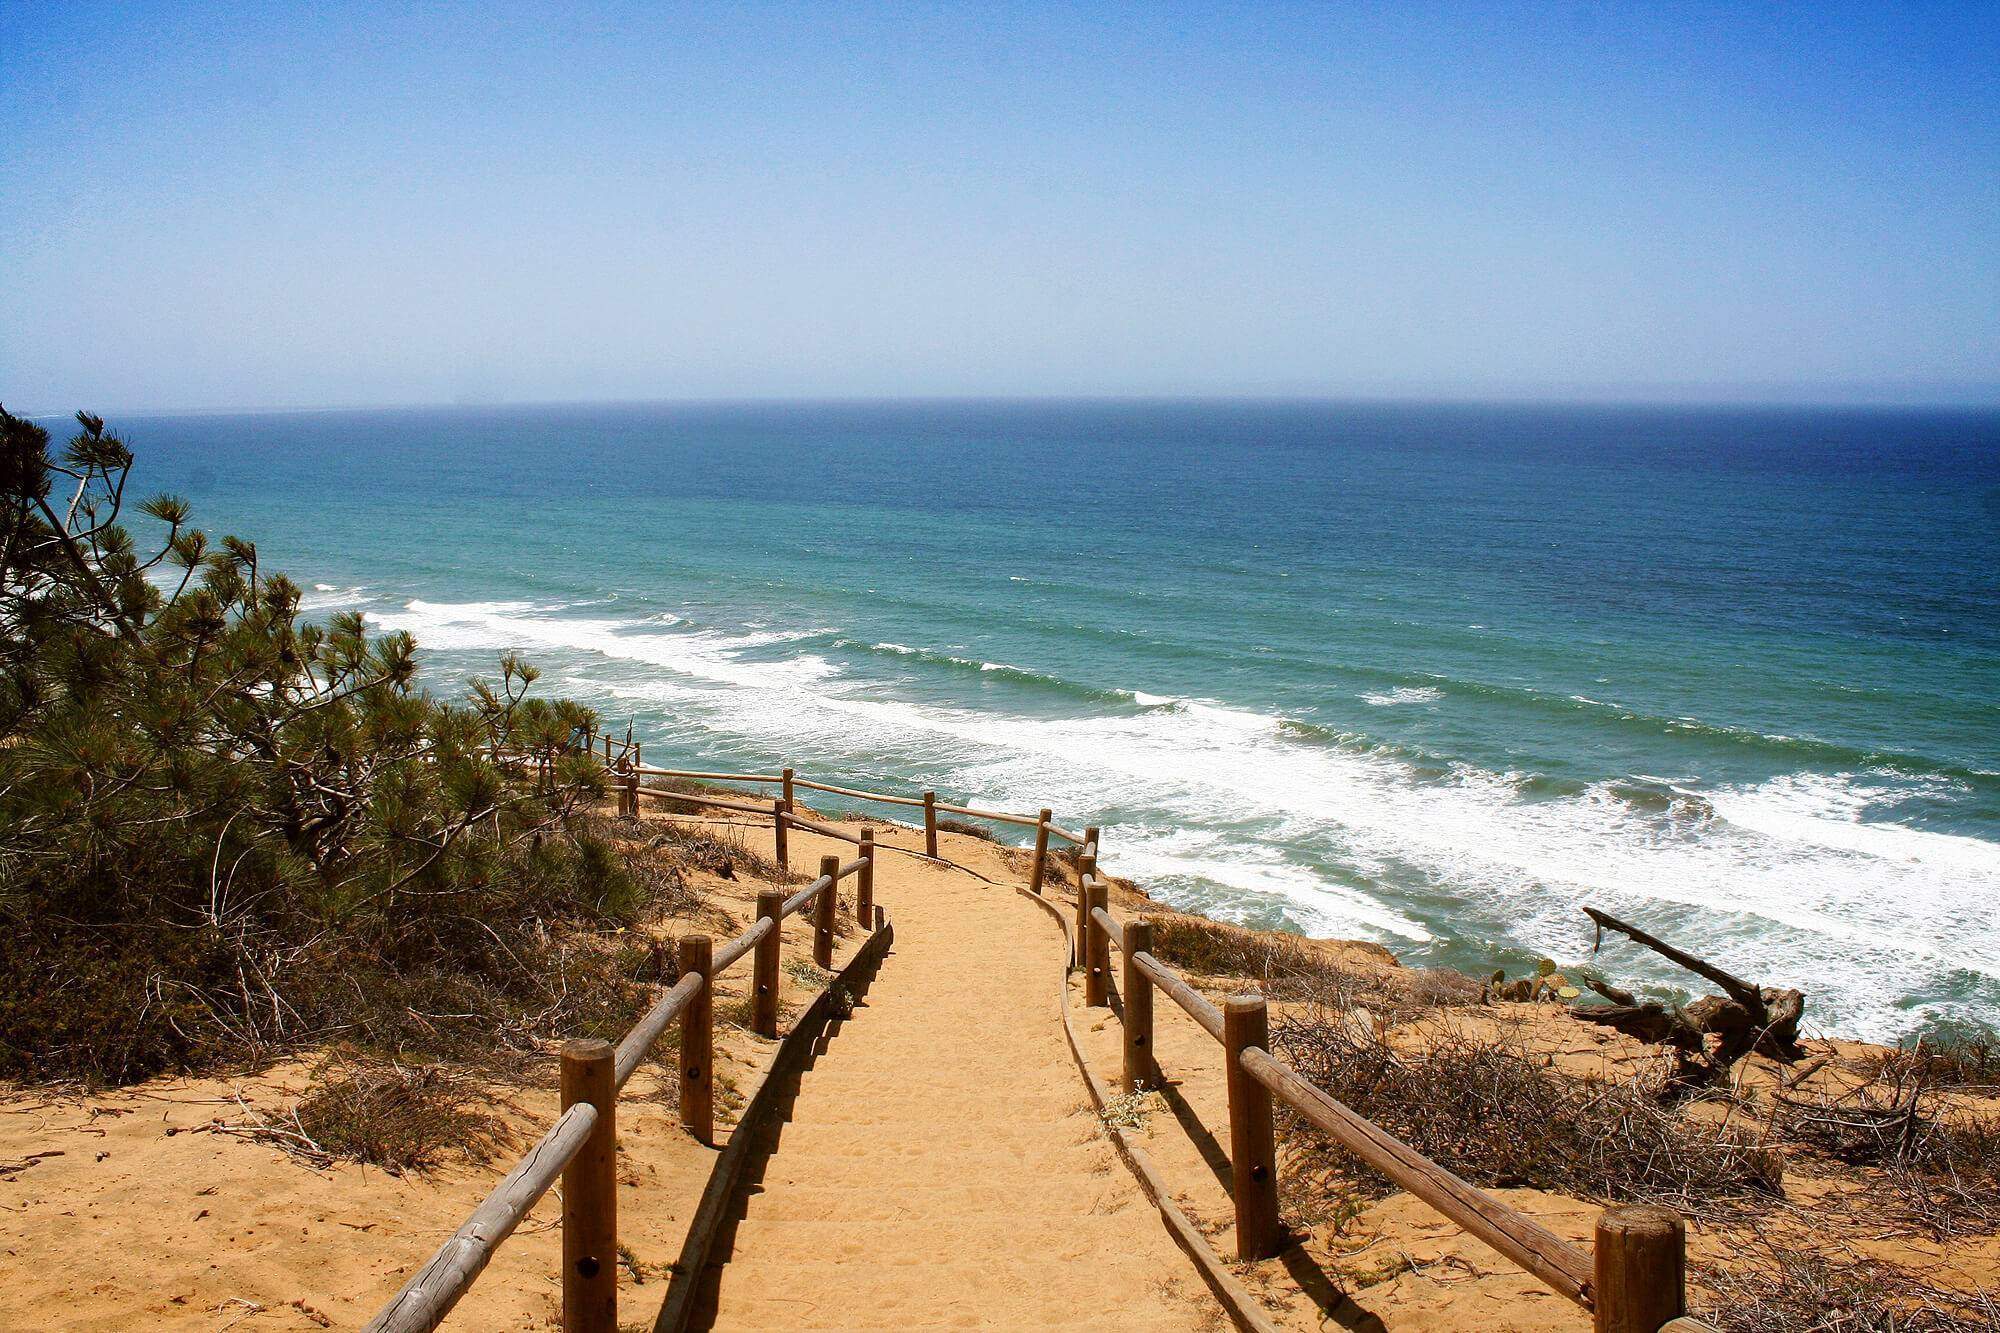 Hike Torrey Pines, one of San Diego's most scenic coastal parks.